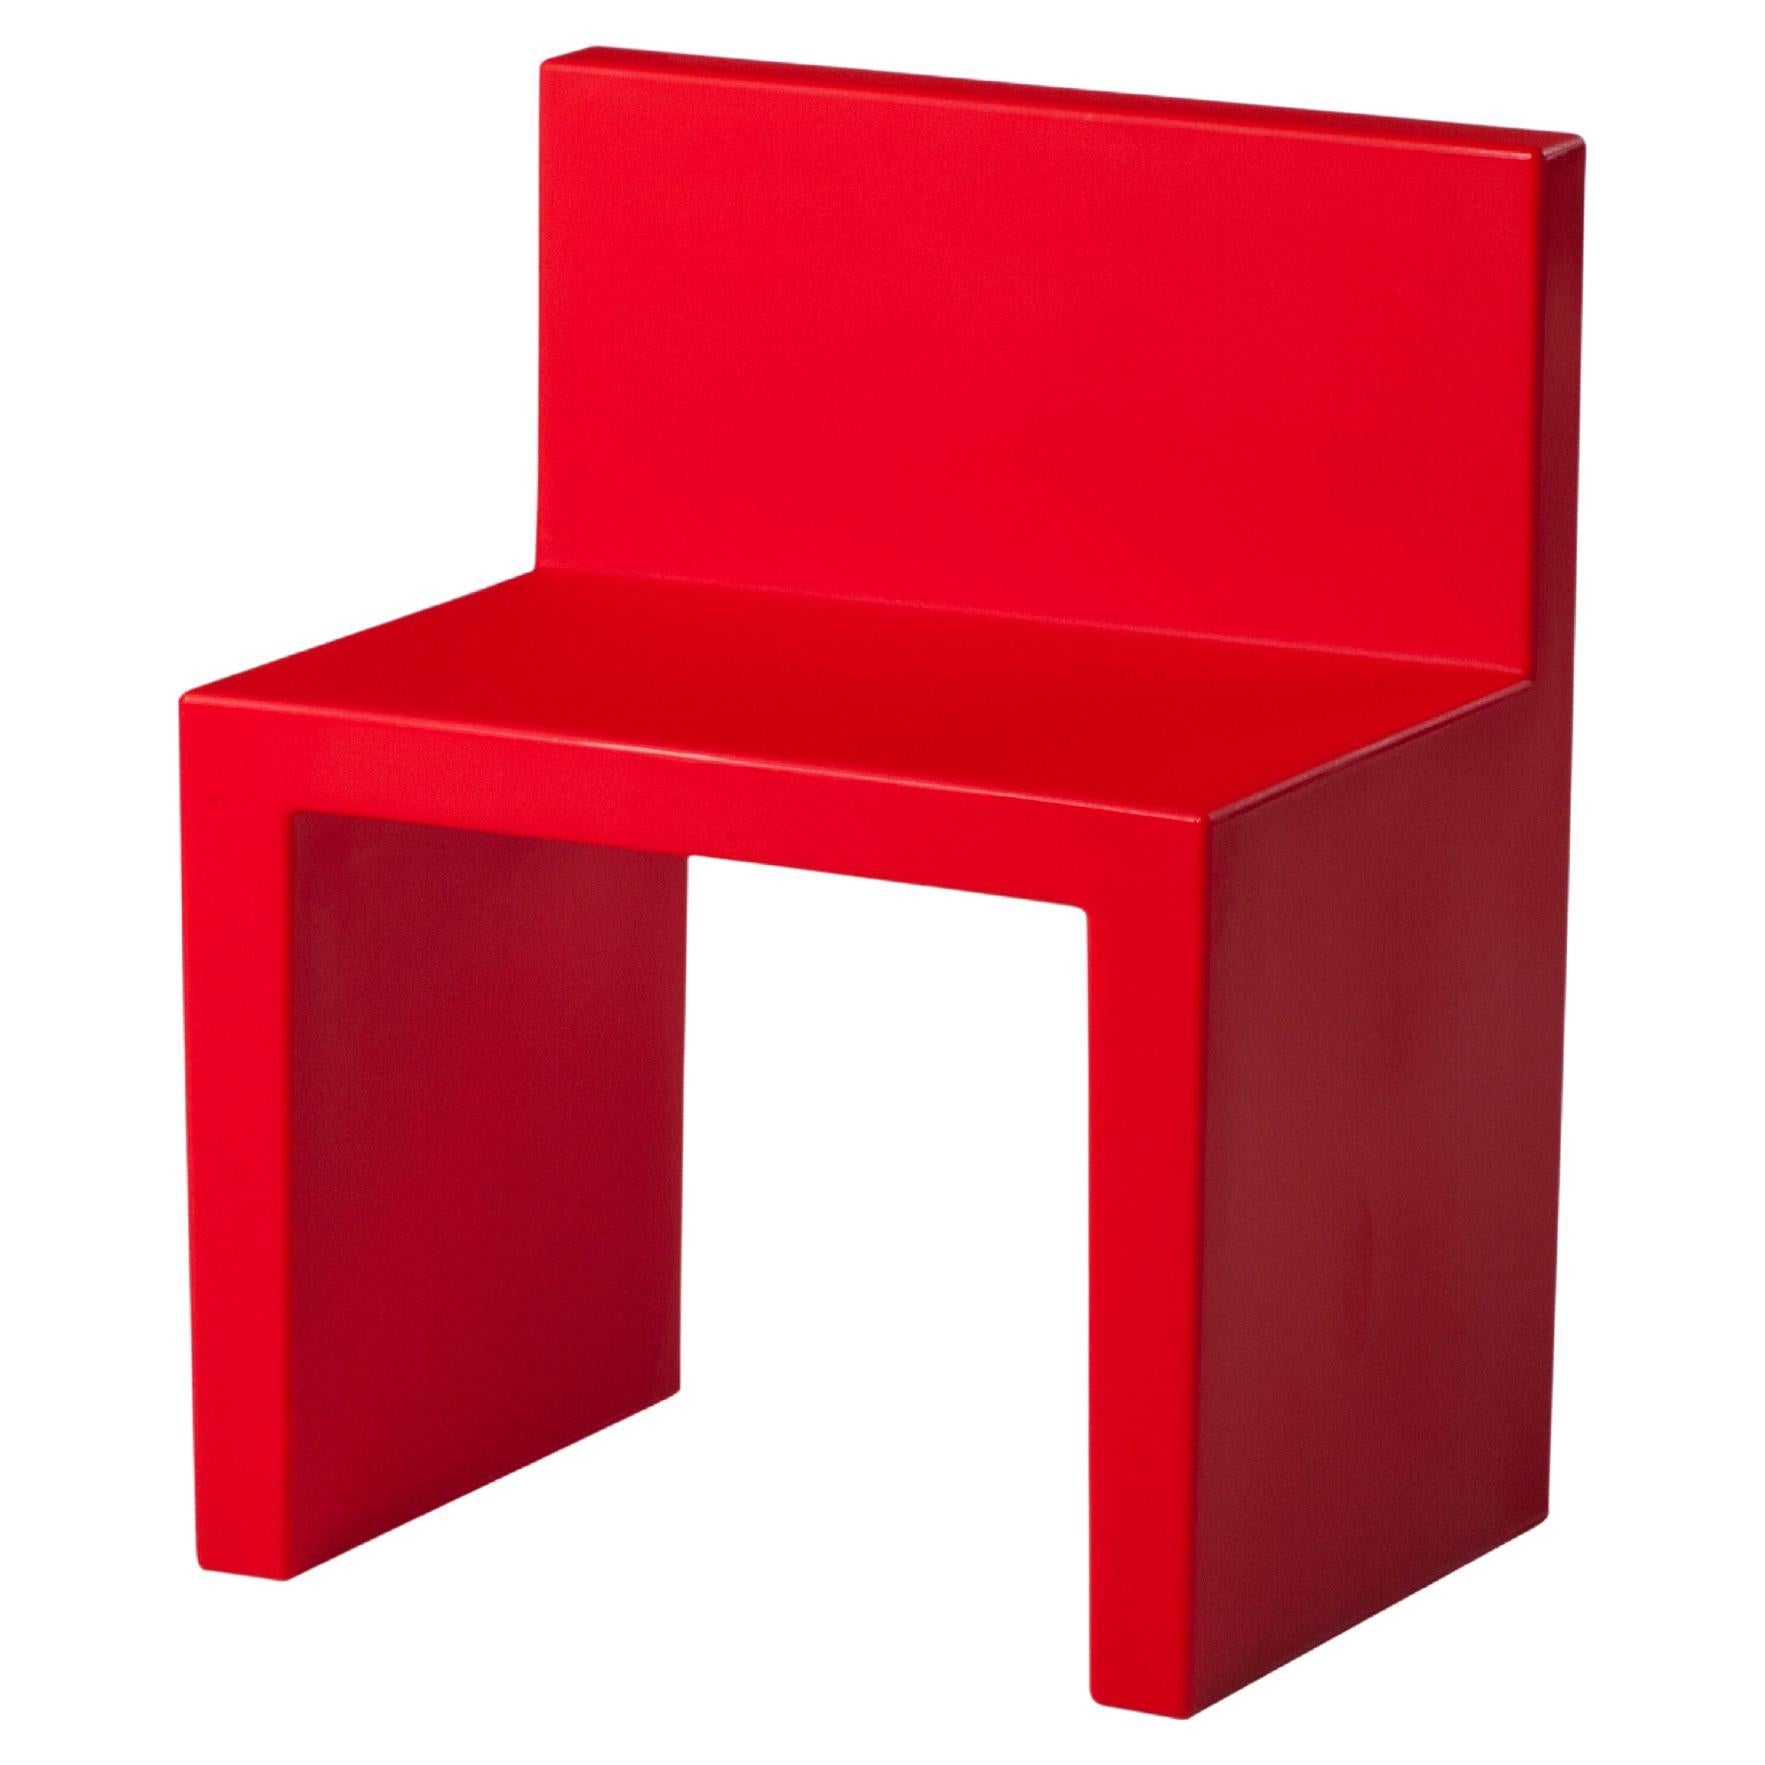 Slide Design Angolo Retto Kids Chair in Flame Red by Slide Studio For Sale